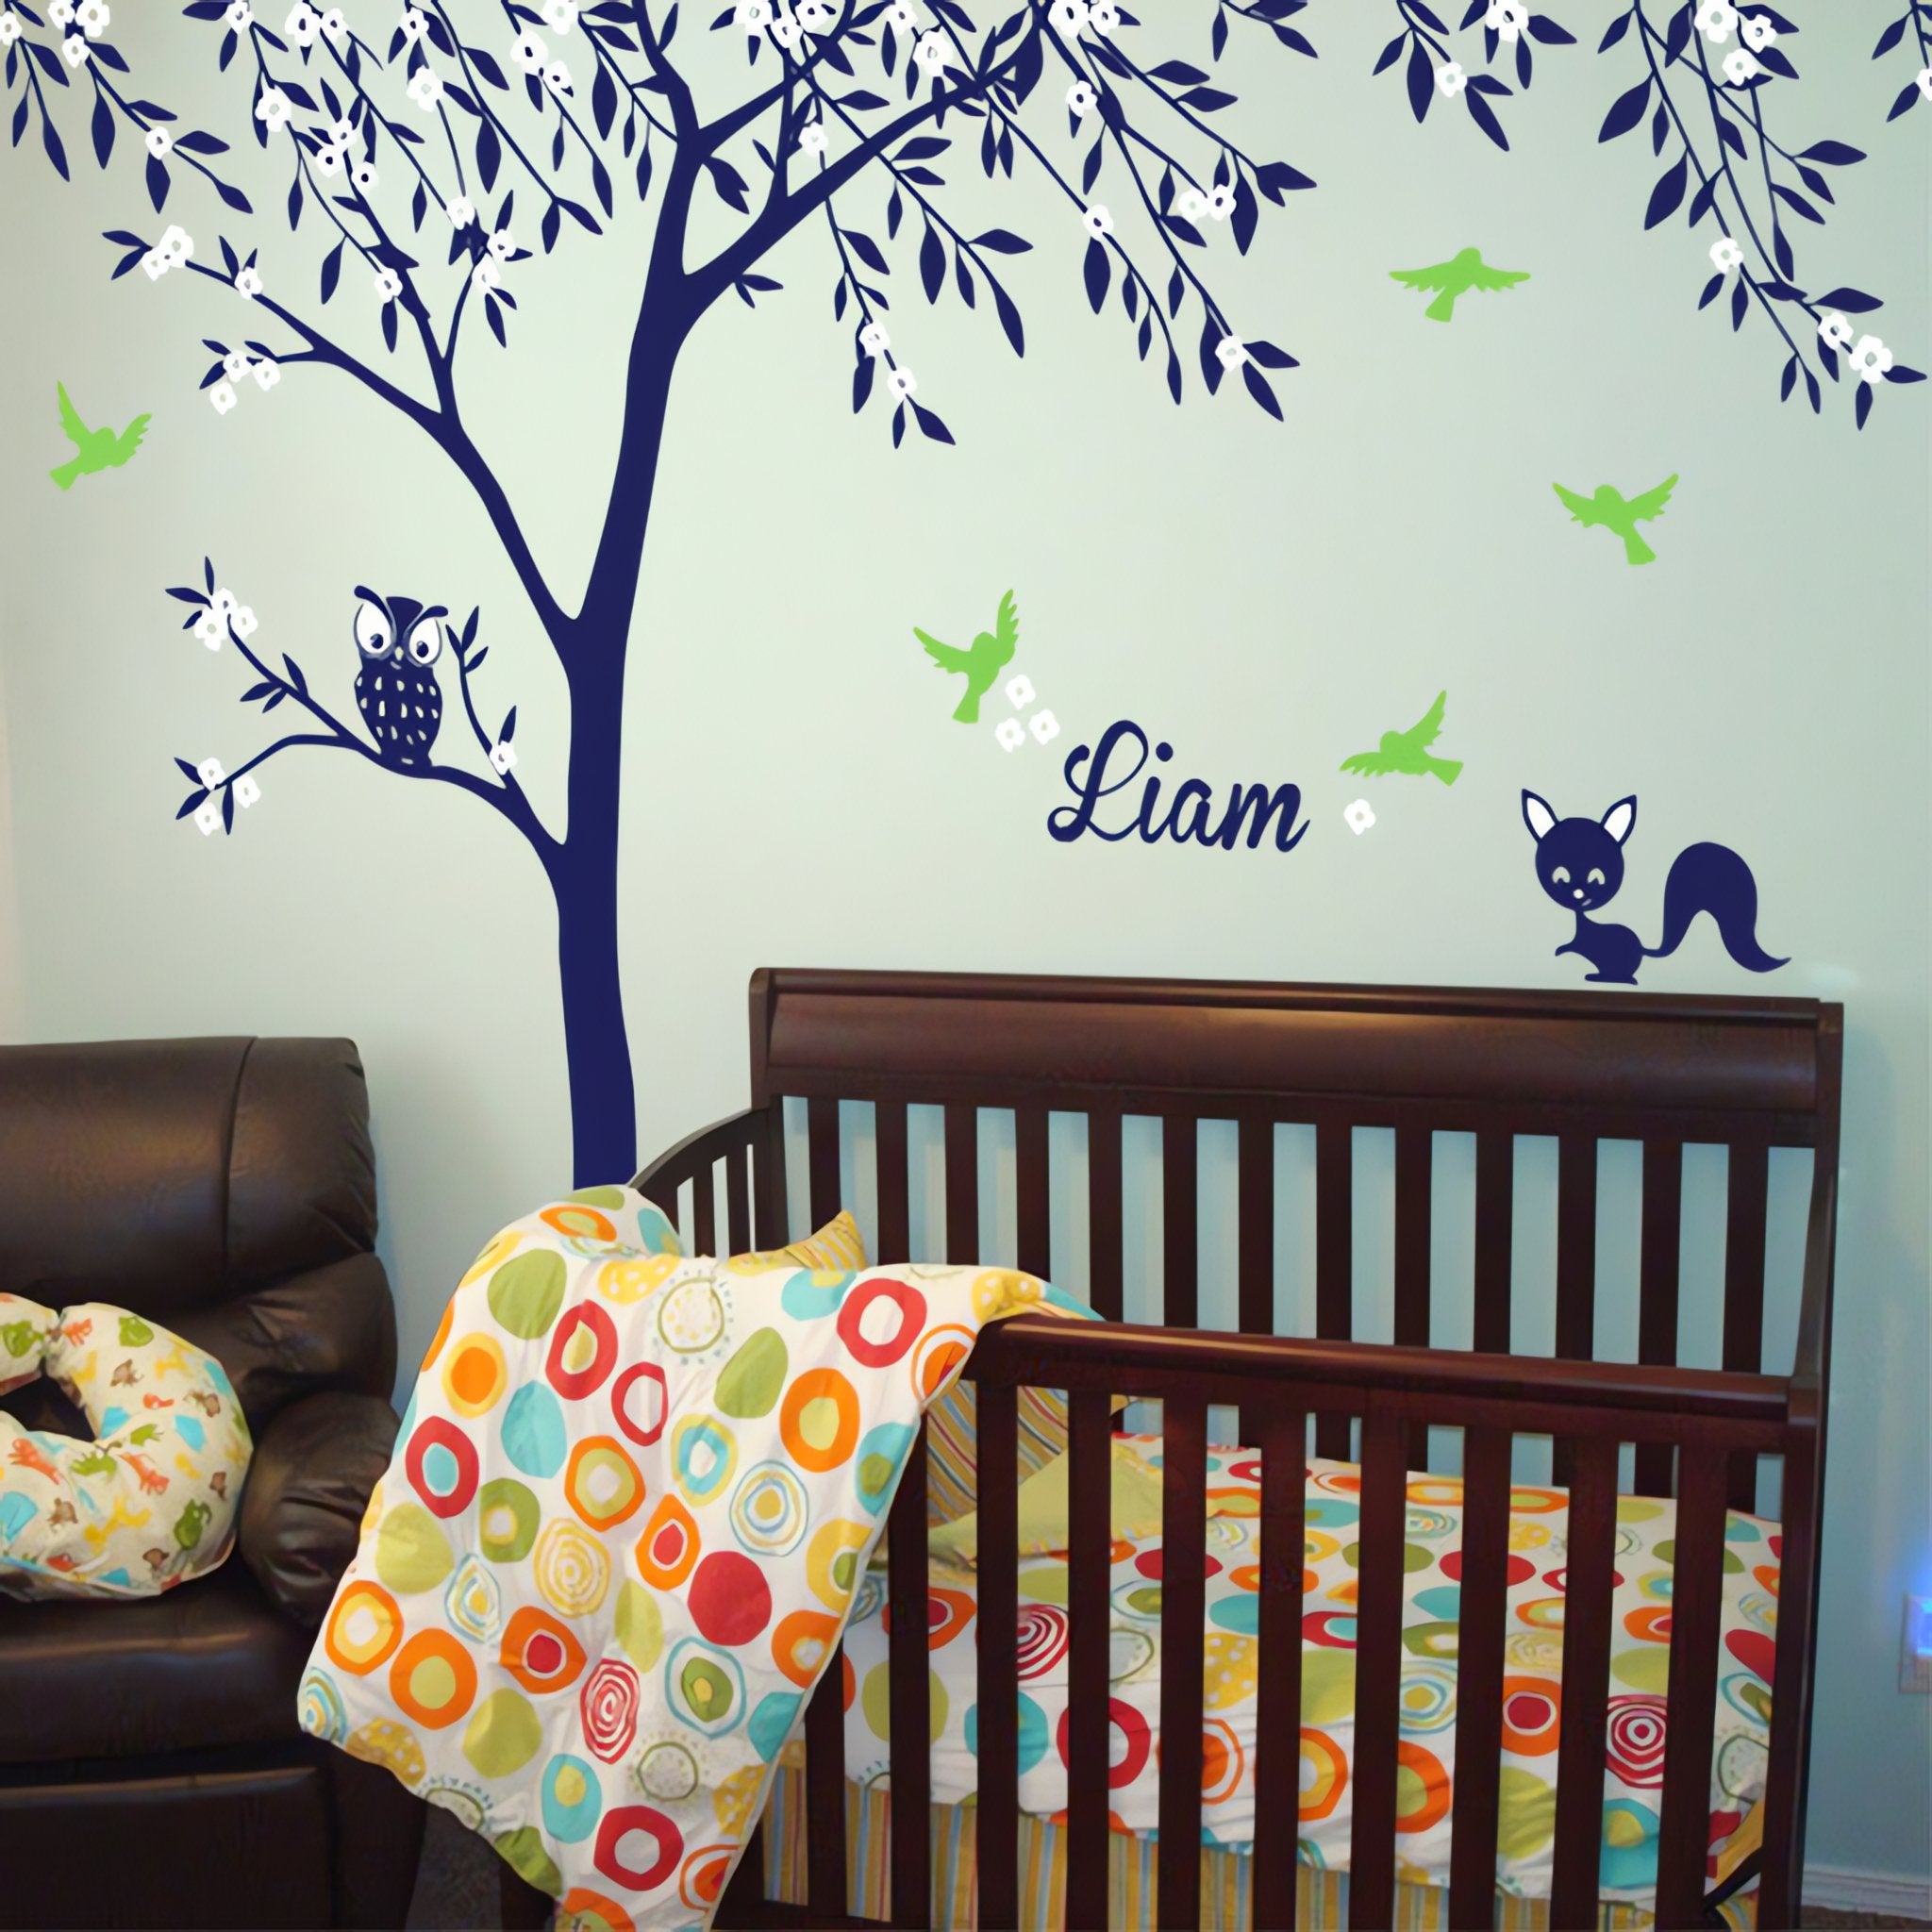 Tree wall sticker with birds, an owl, a squirrel and the name of a loved one in a nursery above a crib.